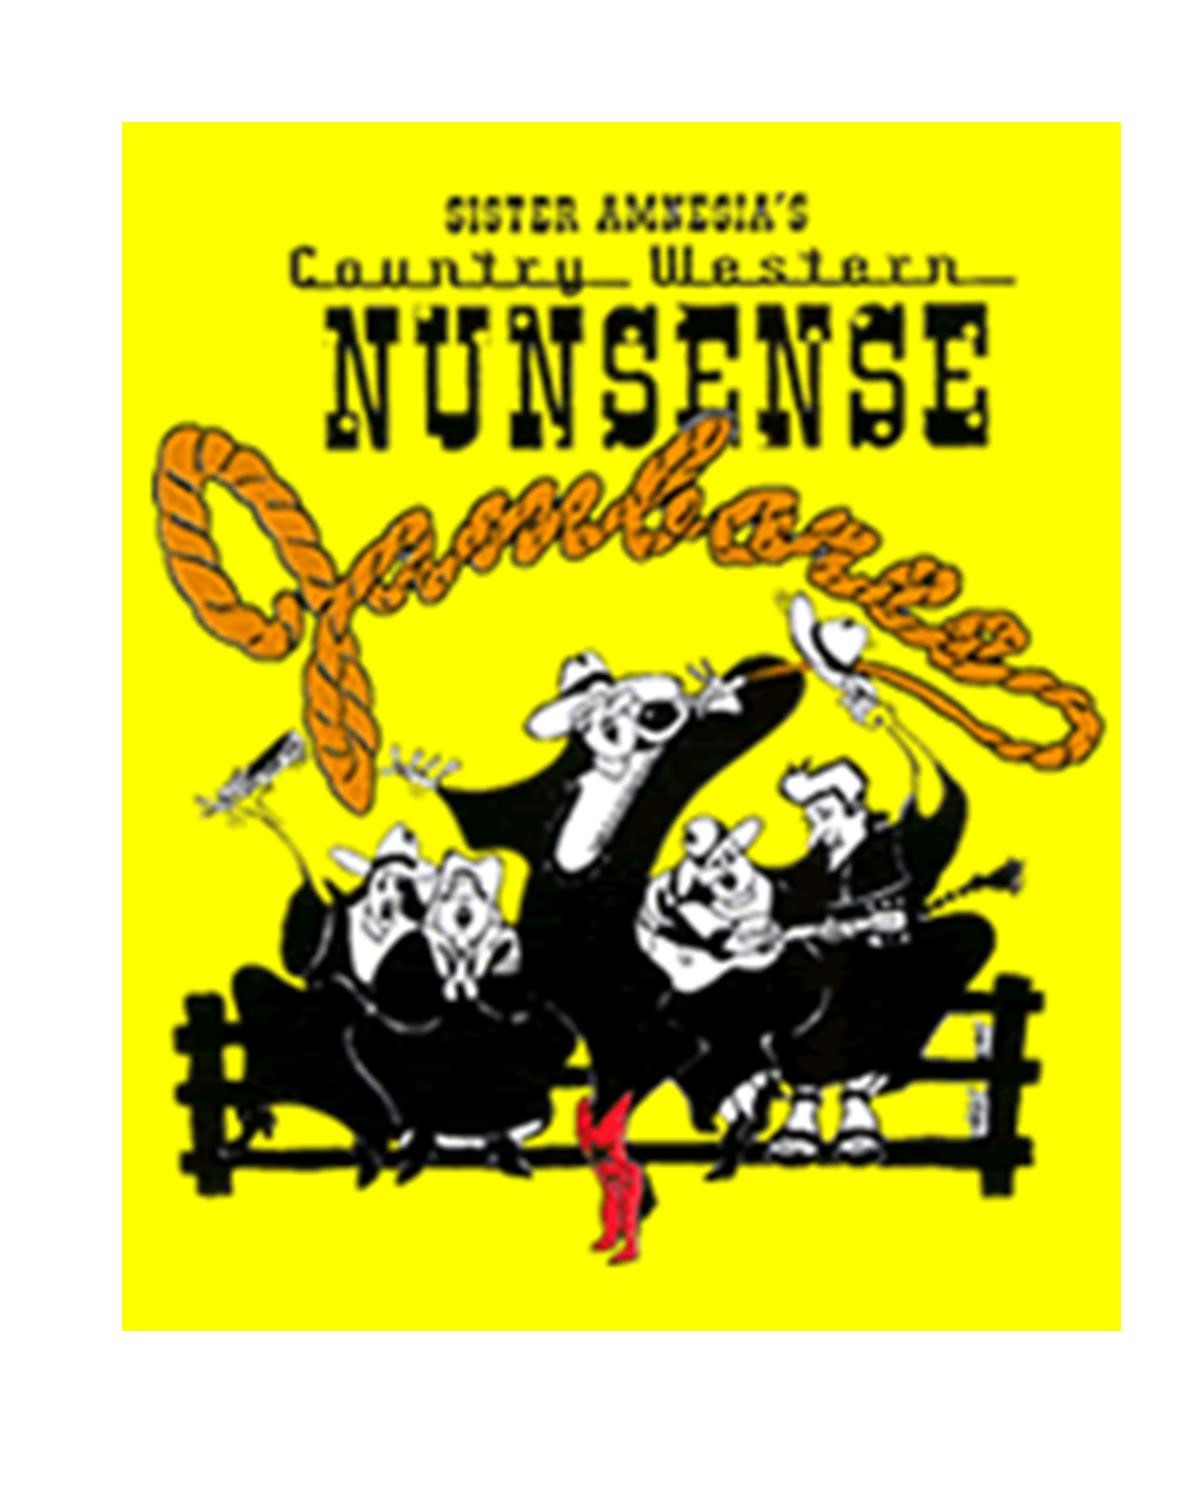 Nunsense Jamboree by Dan Goggin on oct. 18, 00:00@Tater Patch Players Theater - Pick a seat, Buy tickets and Get information on taterpatchplayers.org taterpatchplayers